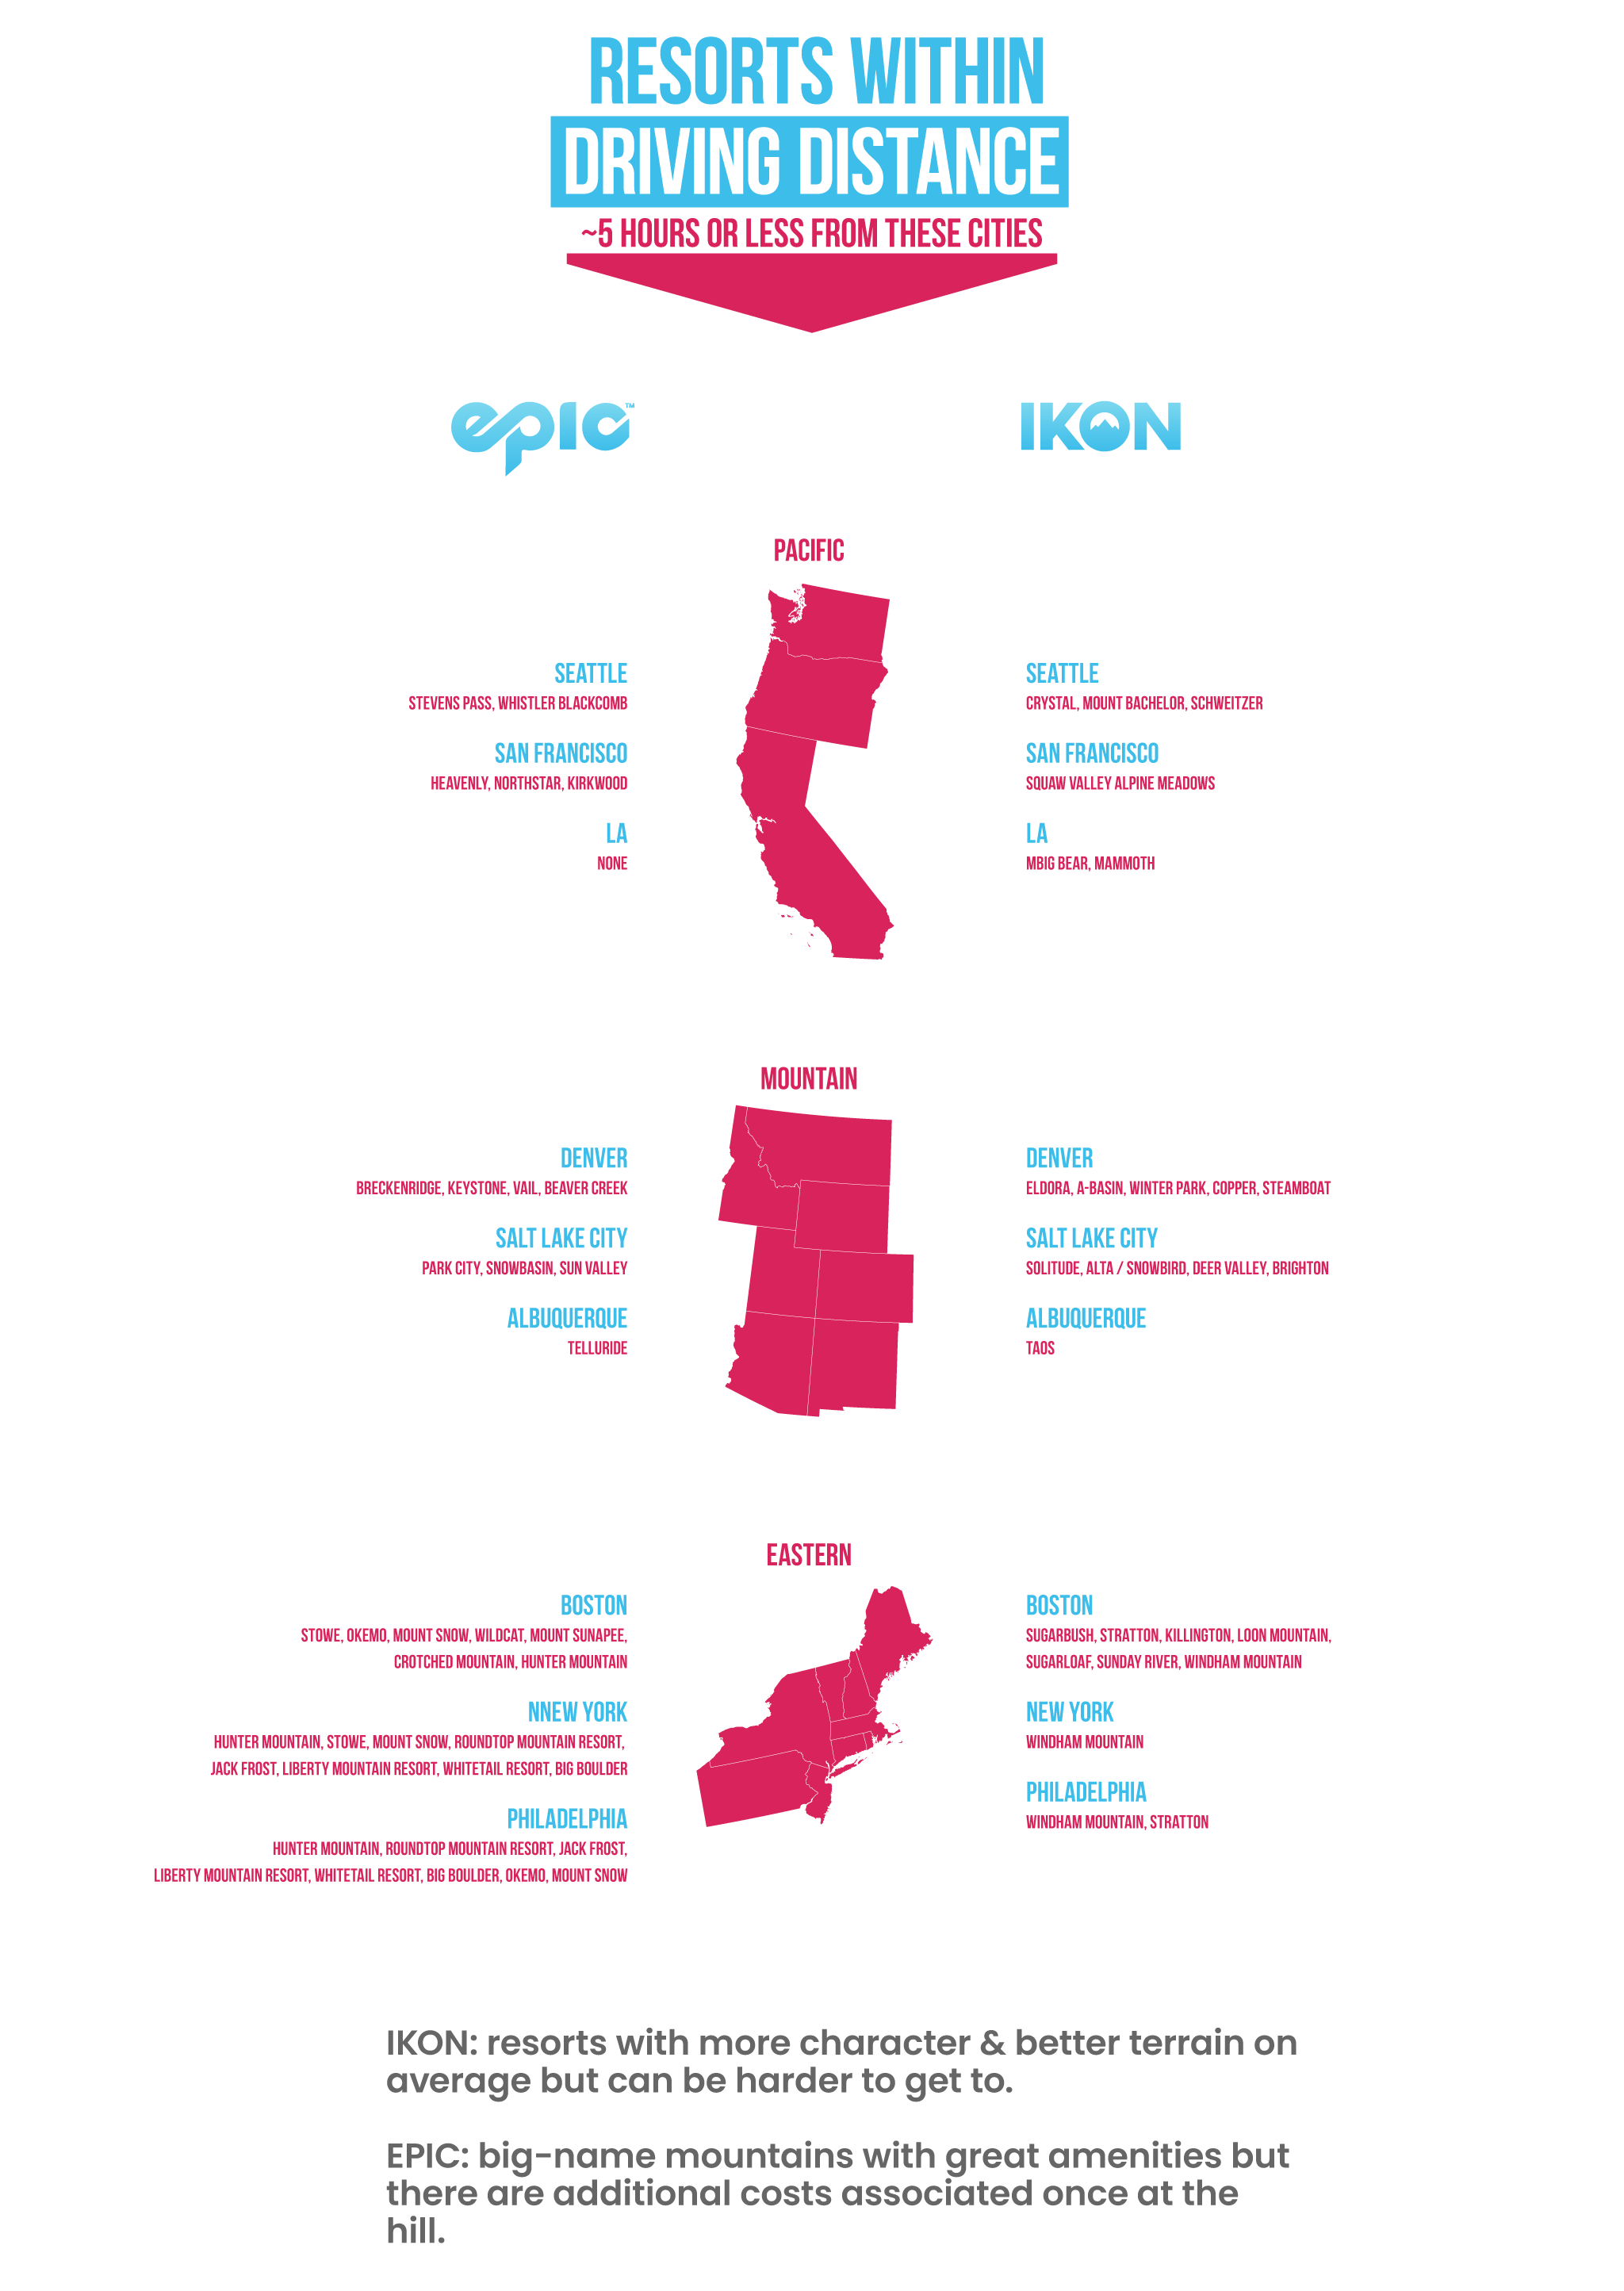 Map of Epic and Ikon resorts within driving distance of metropolitan areas in the U.S.